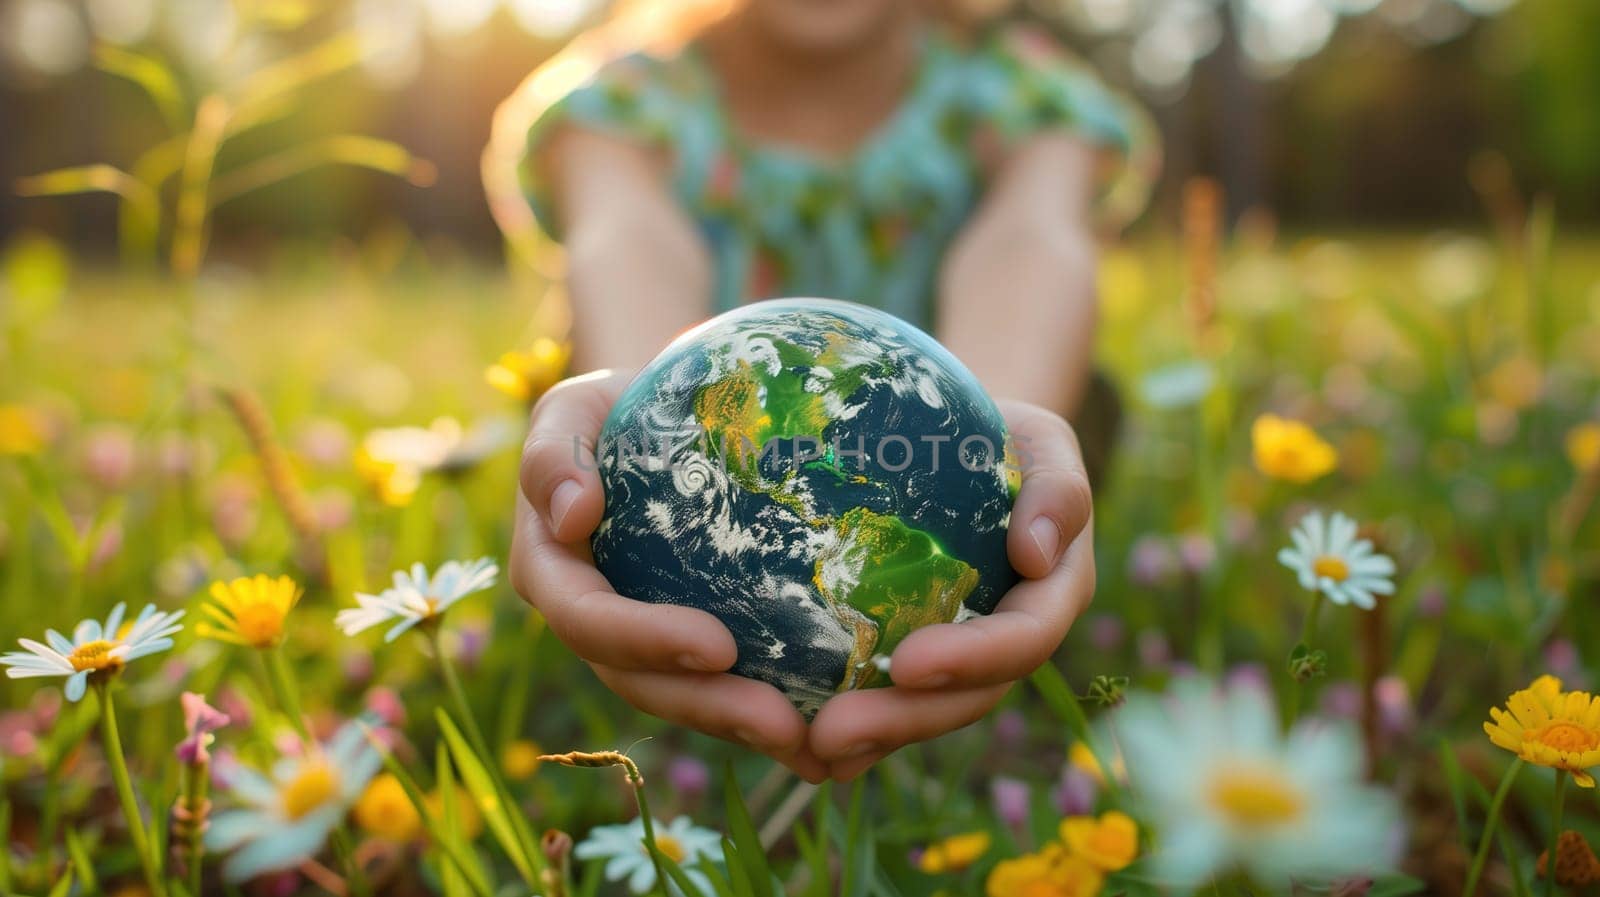 A person is holding a small Earth globe in their hands, symbolizing care for the planet and the Earth Day concept. The individuals hands cradle the globe gently, illustrating a sense of responsibility and connection to the world.